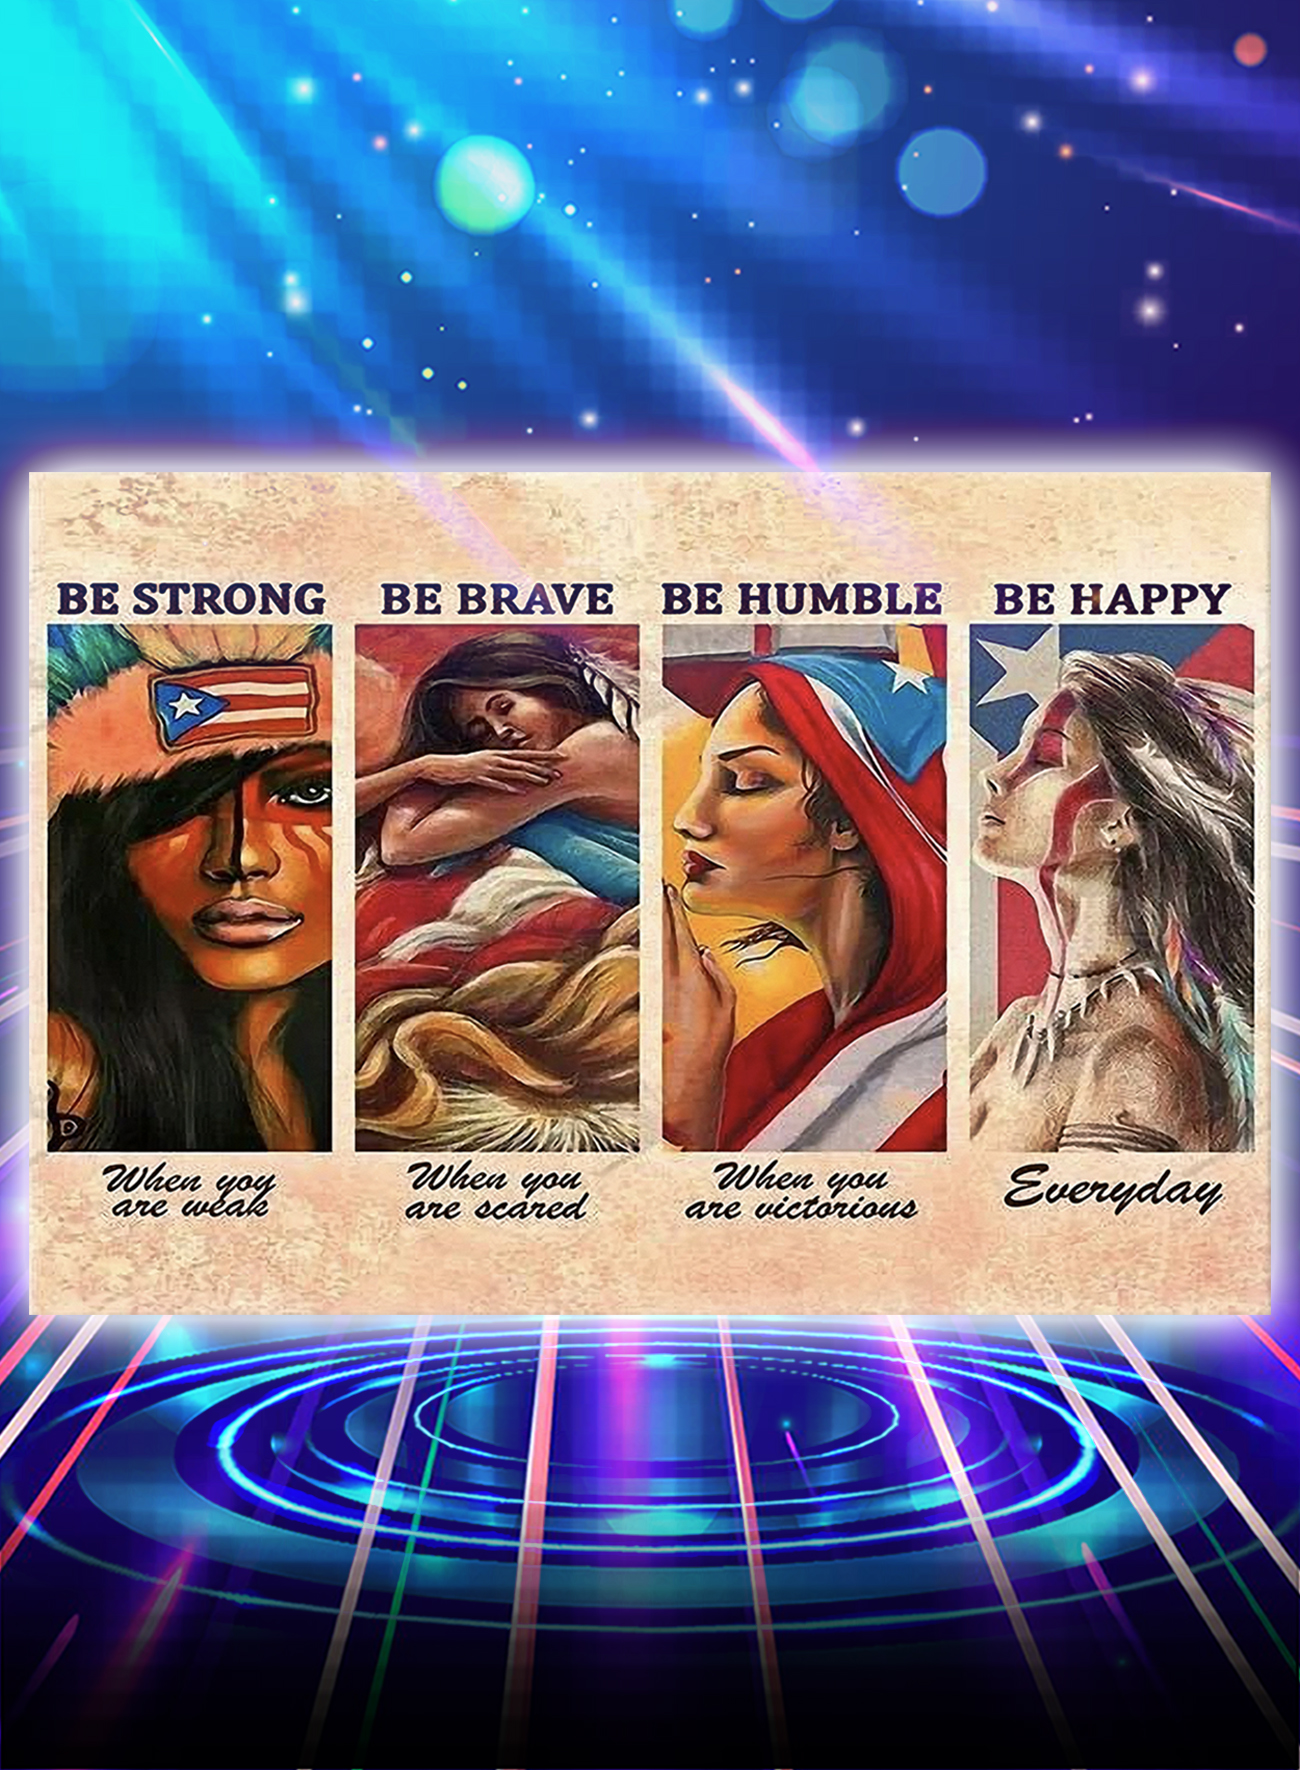 Puerto rico girls be strong be brave be humble be happy poster - A1